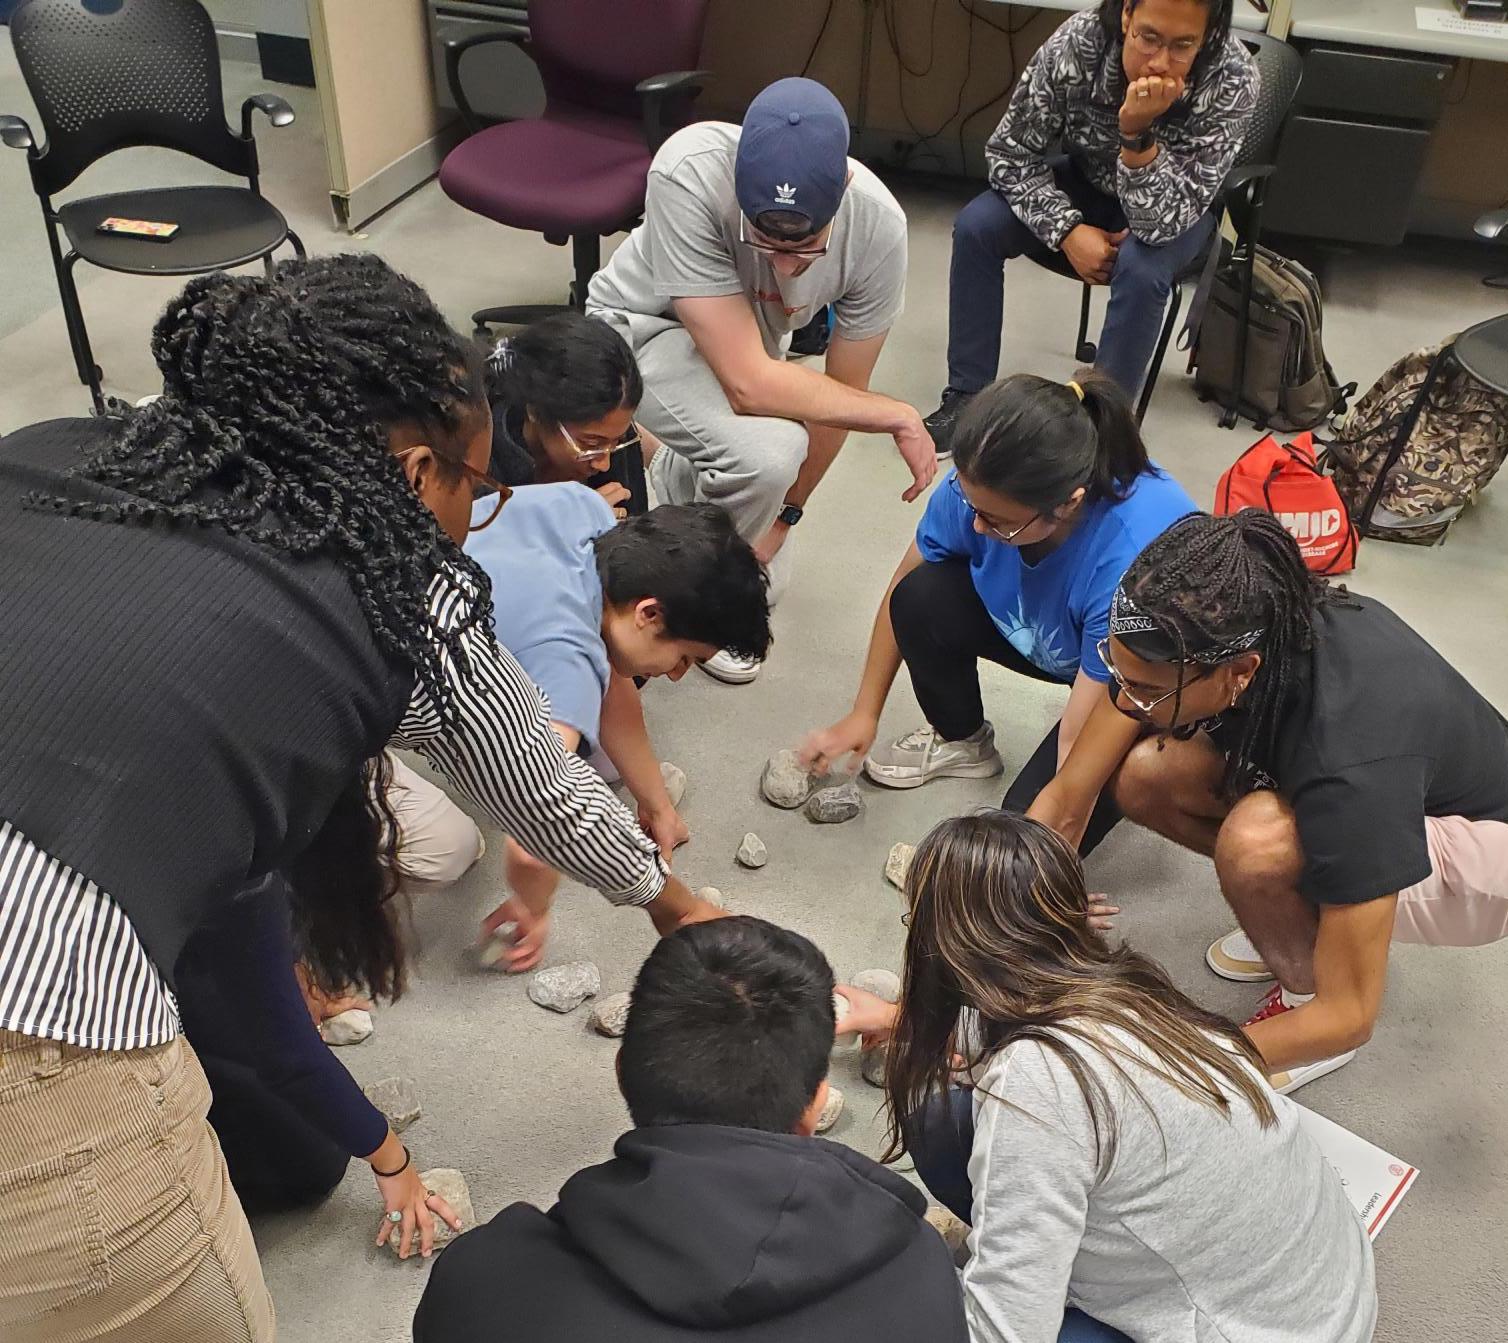 Students gathered around a circle of rocks inside